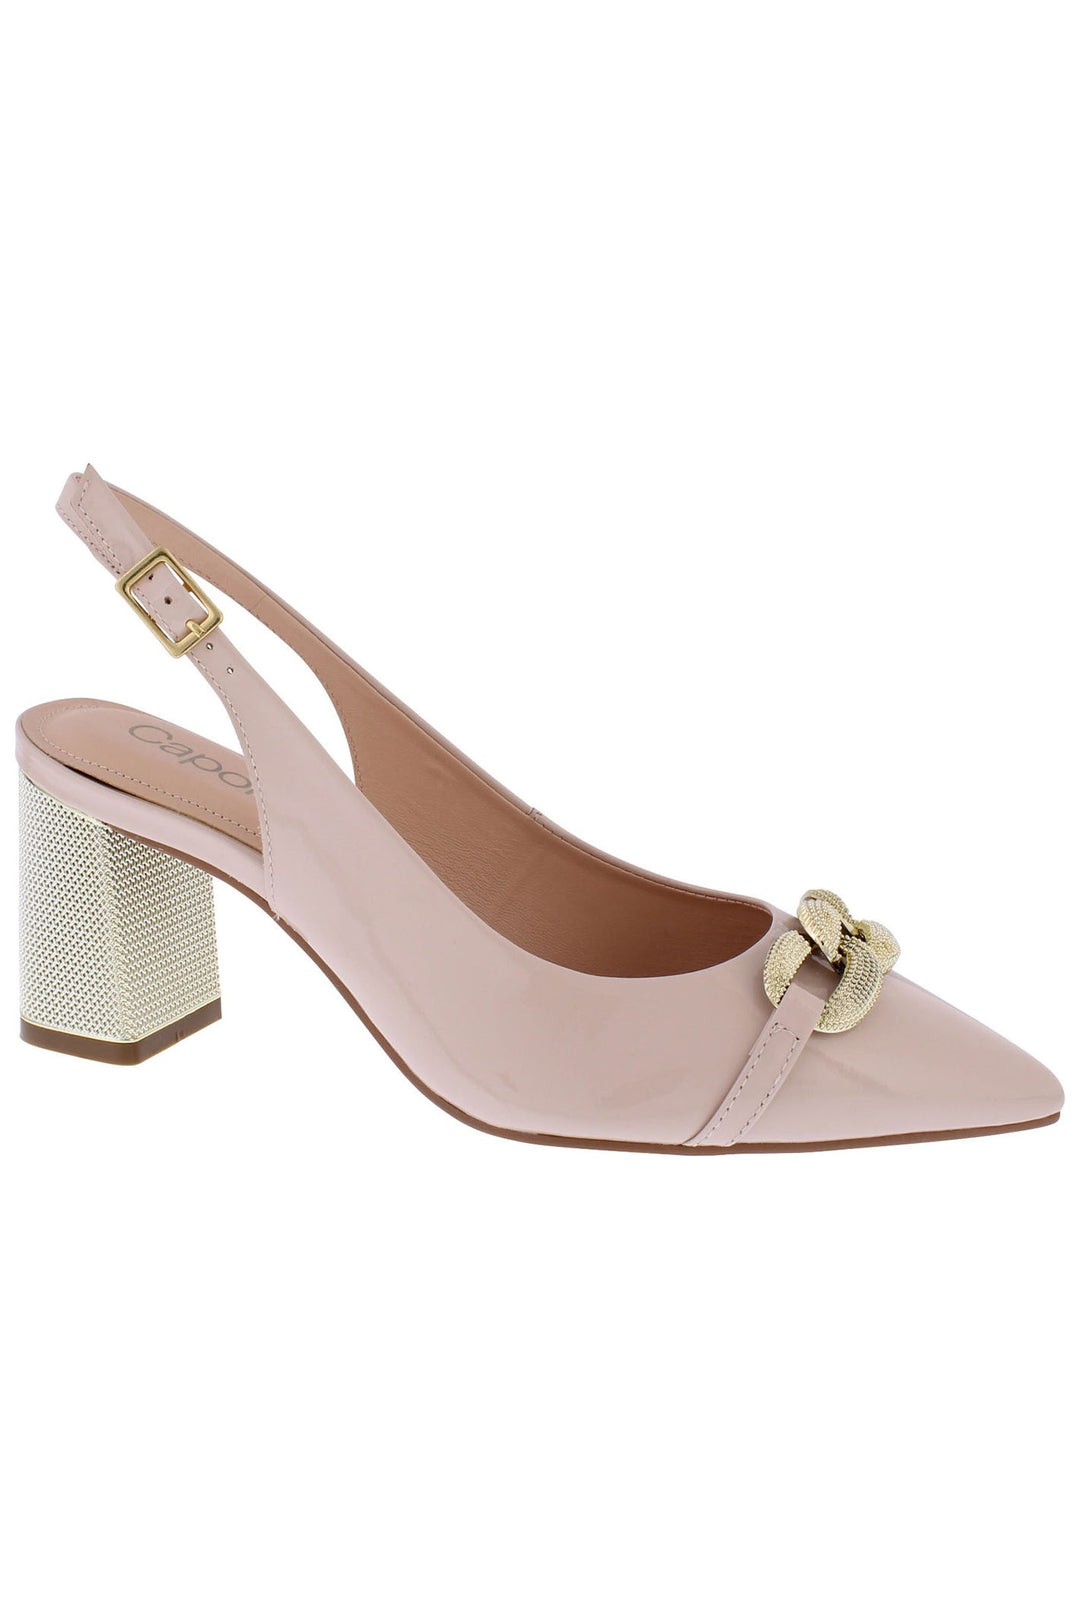 Capollini C108 Mazy Nude Pink Patent Chain Sling Shoes - Dotique